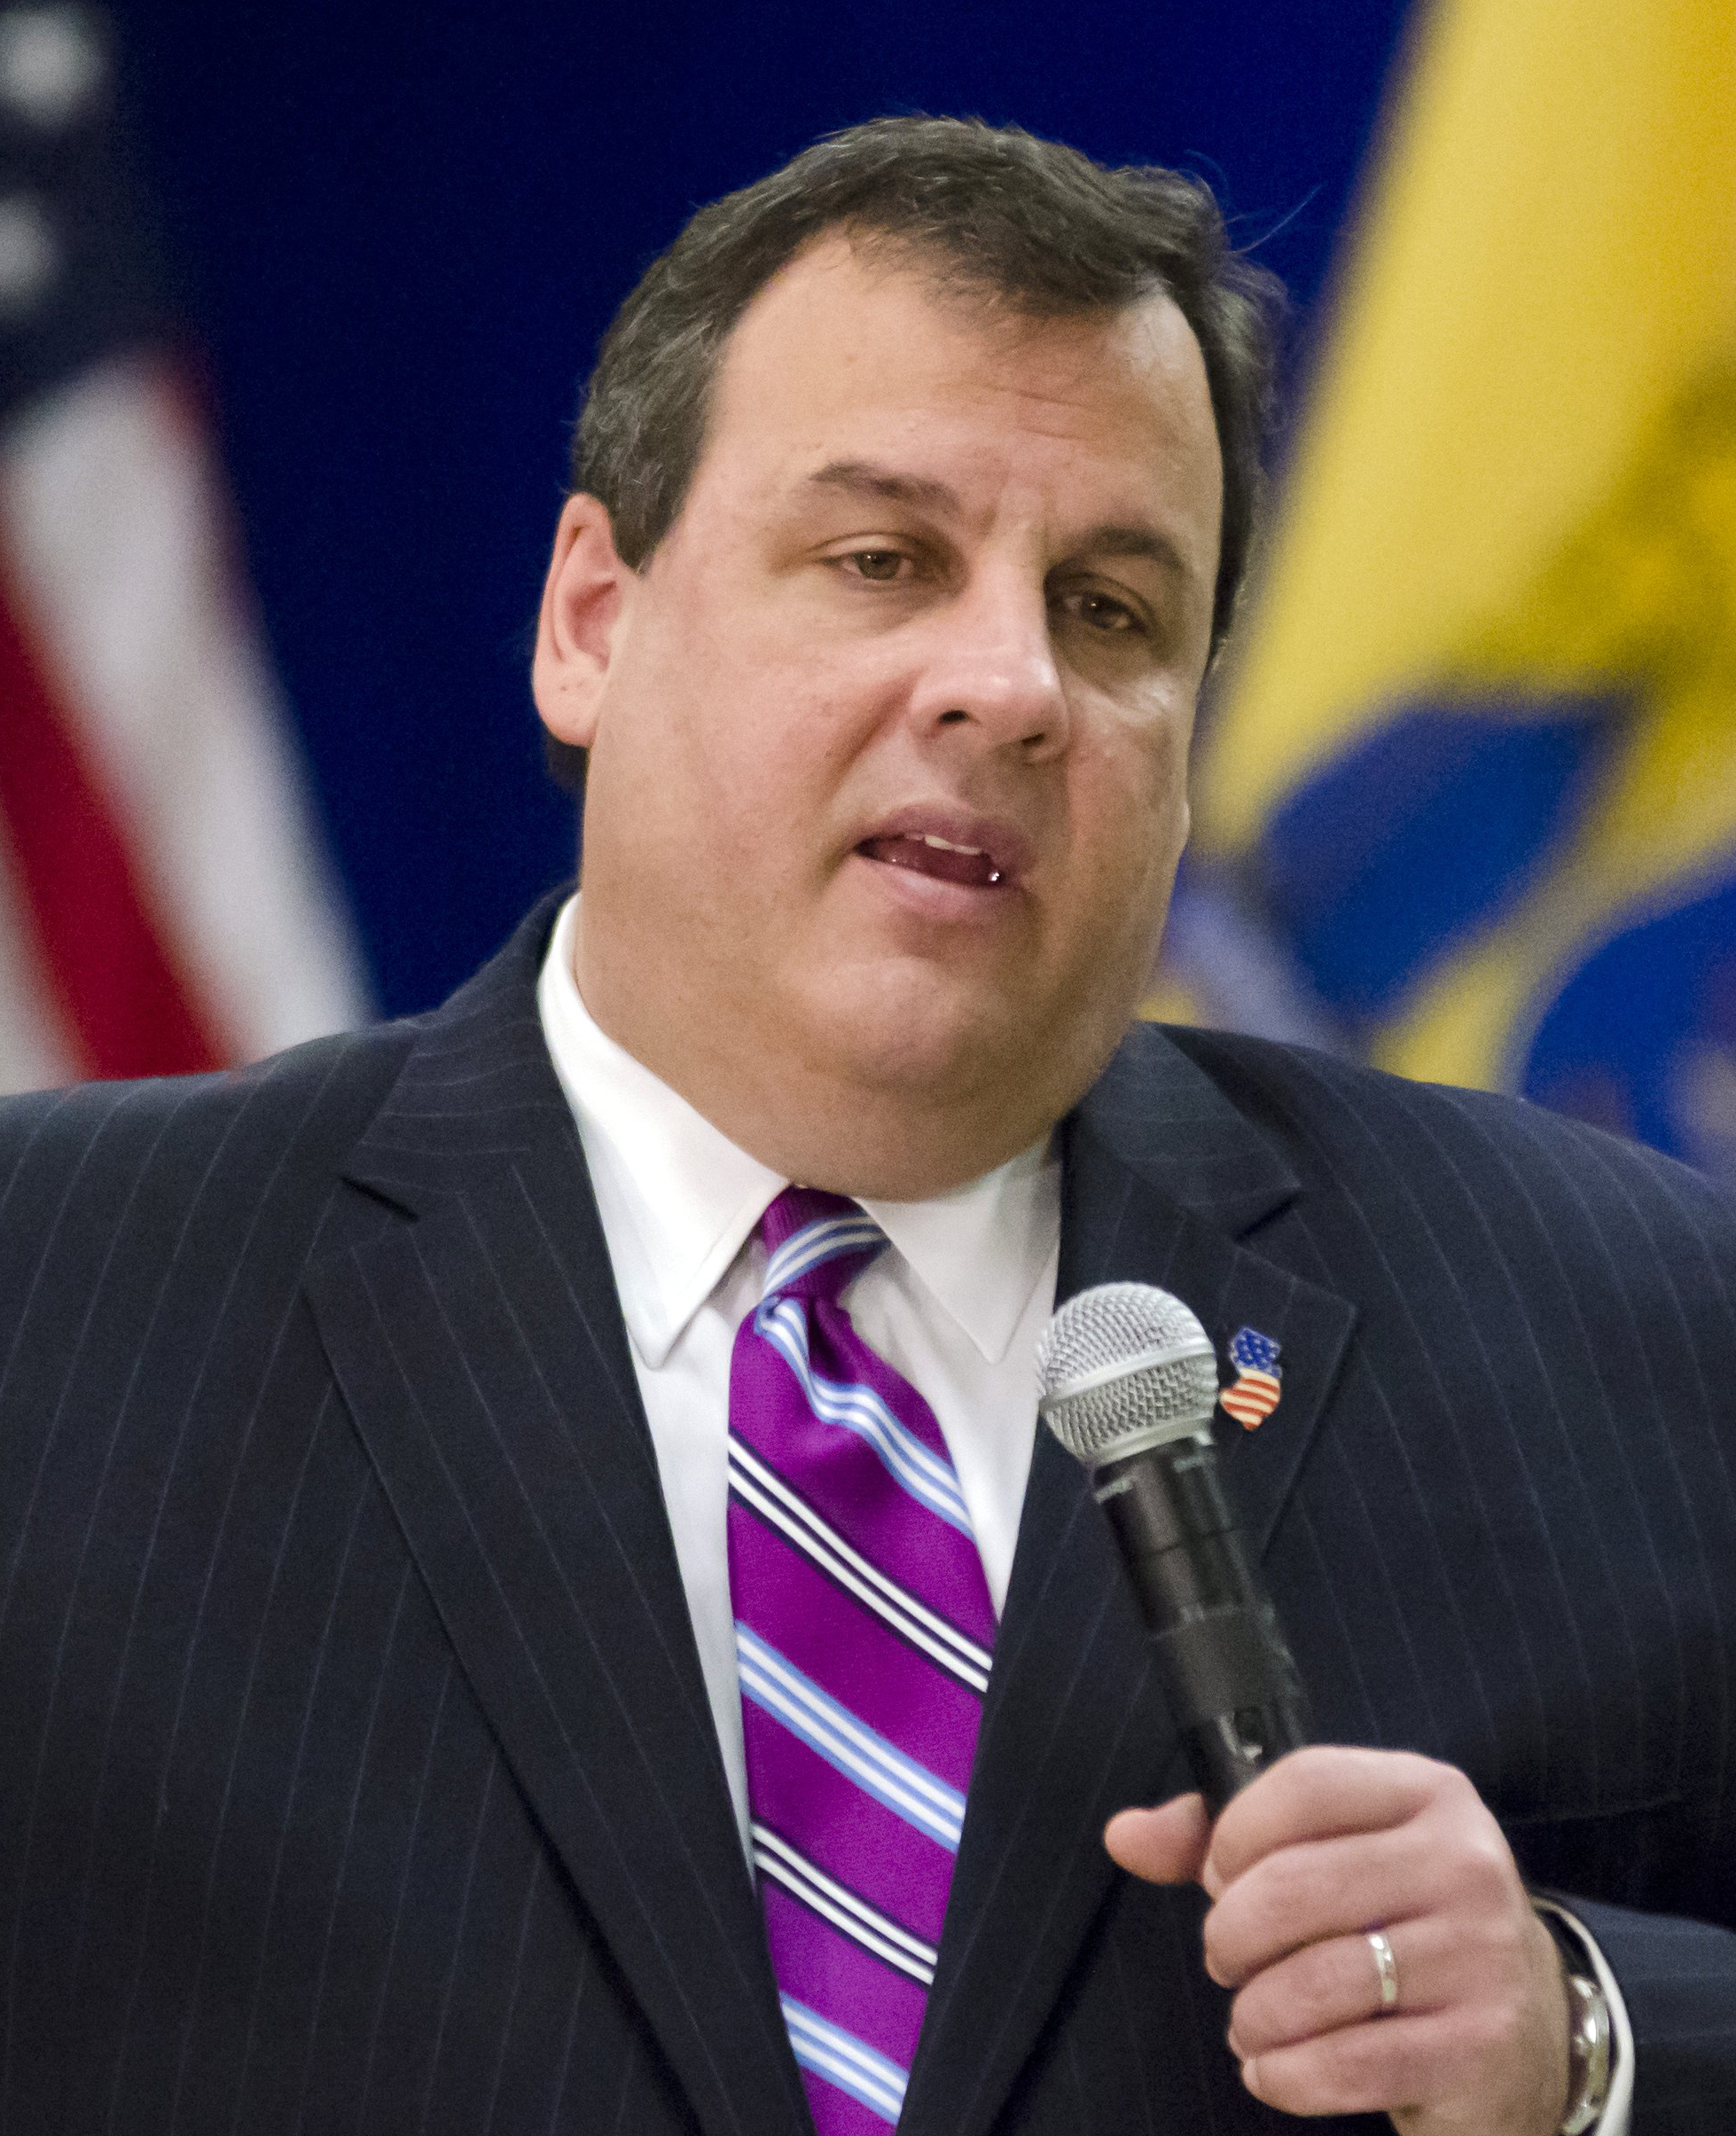 Is New Jersey Fudging Its Pension Fund Results to Defuse a Christie Scandal?